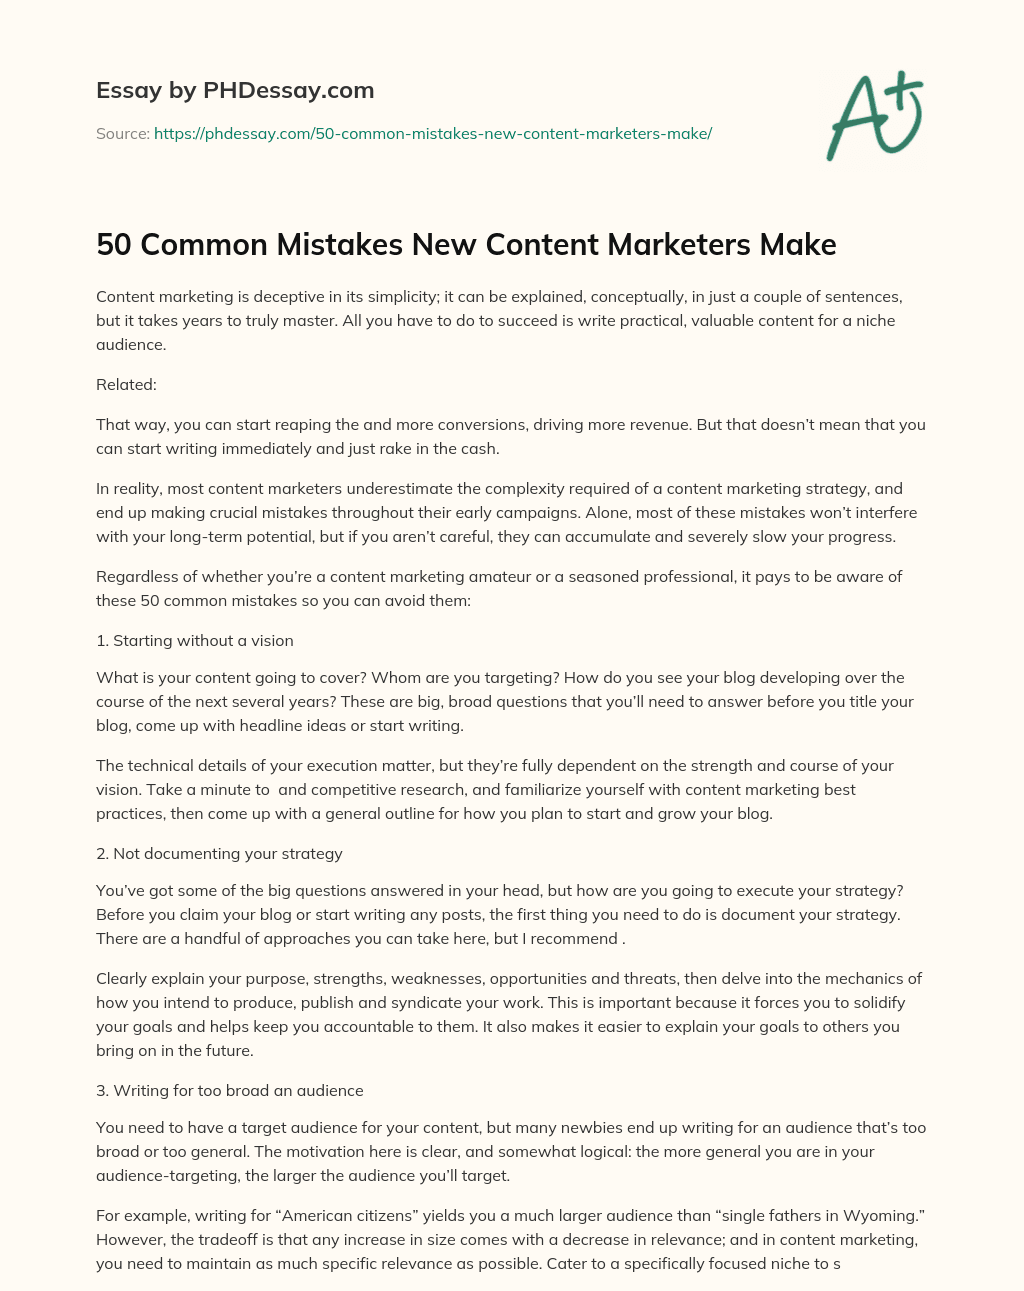 50 Common Mistakes New Content Marketers Make essay